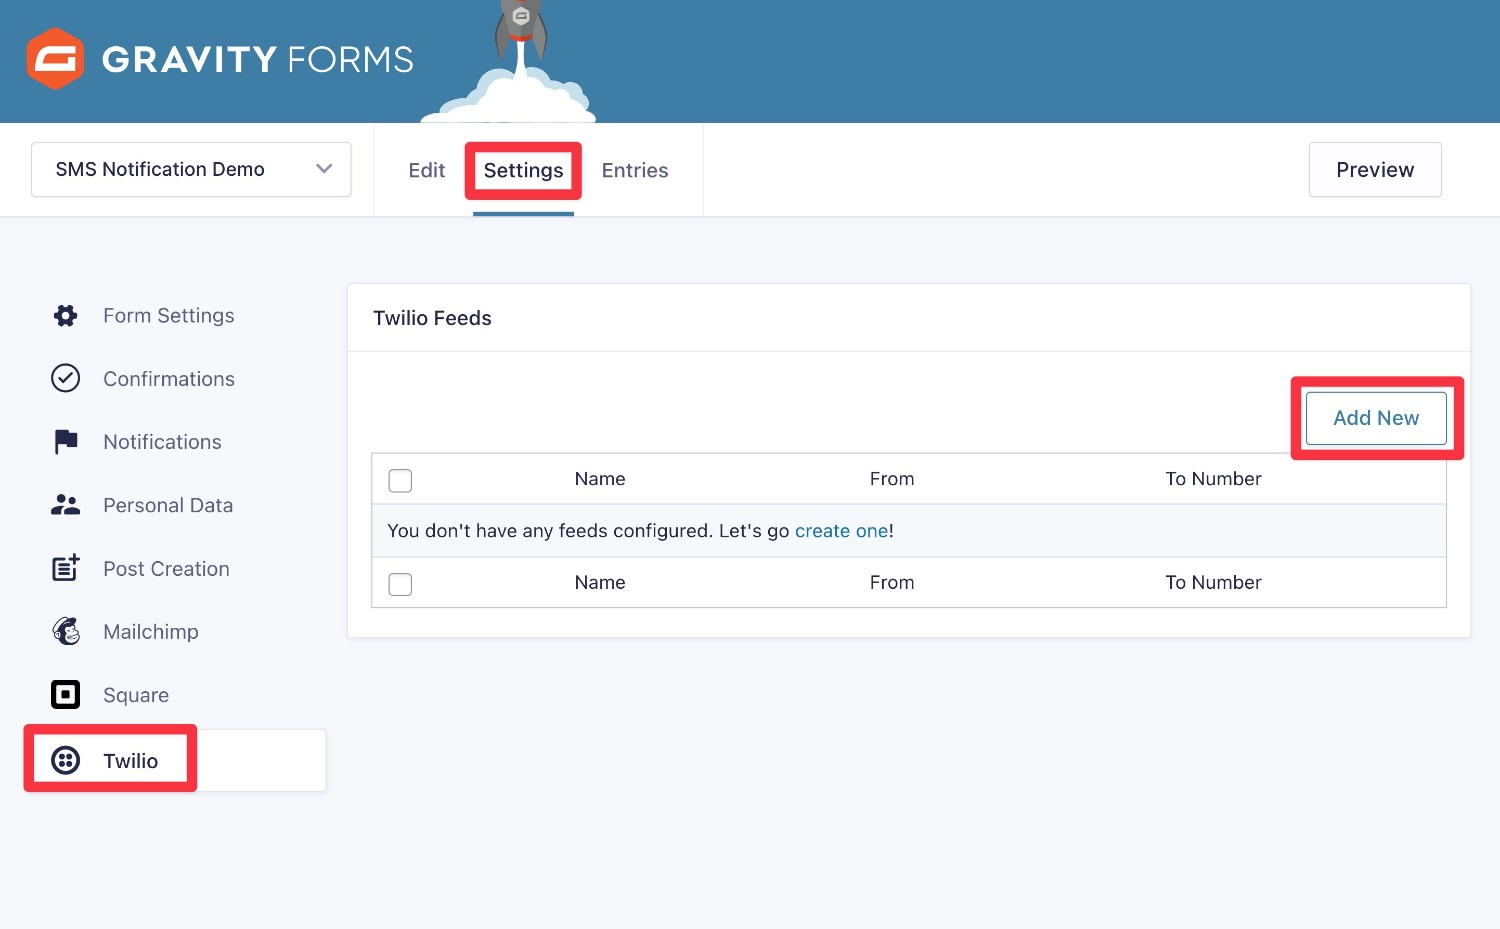 Create a new Gravity Forms TWilio feed